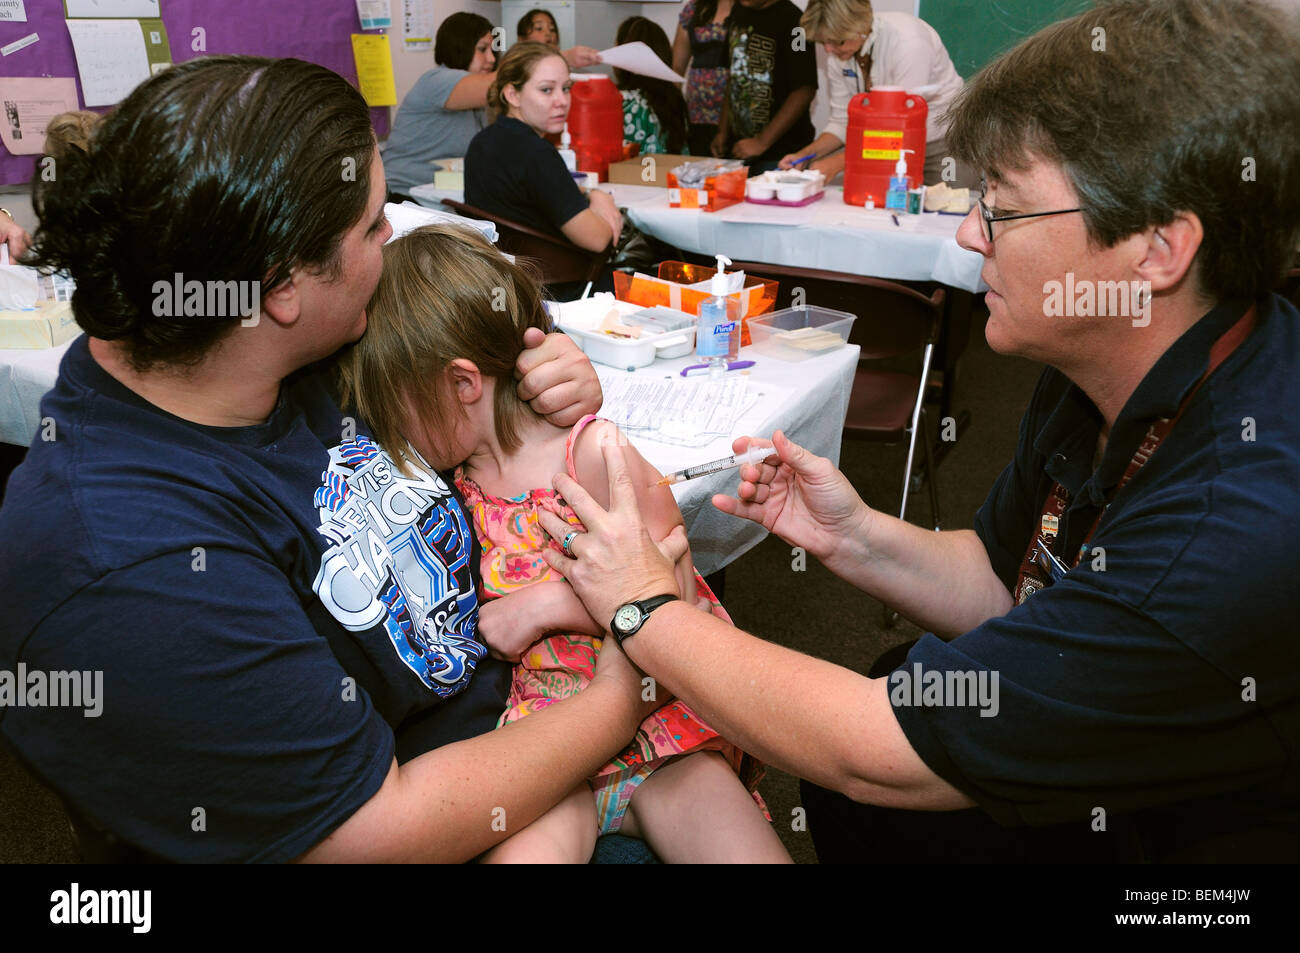 An 5-year-old girl is vaccinated for the 2009 H1N1 influenza, also known as the Swine Flu, with an inactivated flu shot. Stock Photo